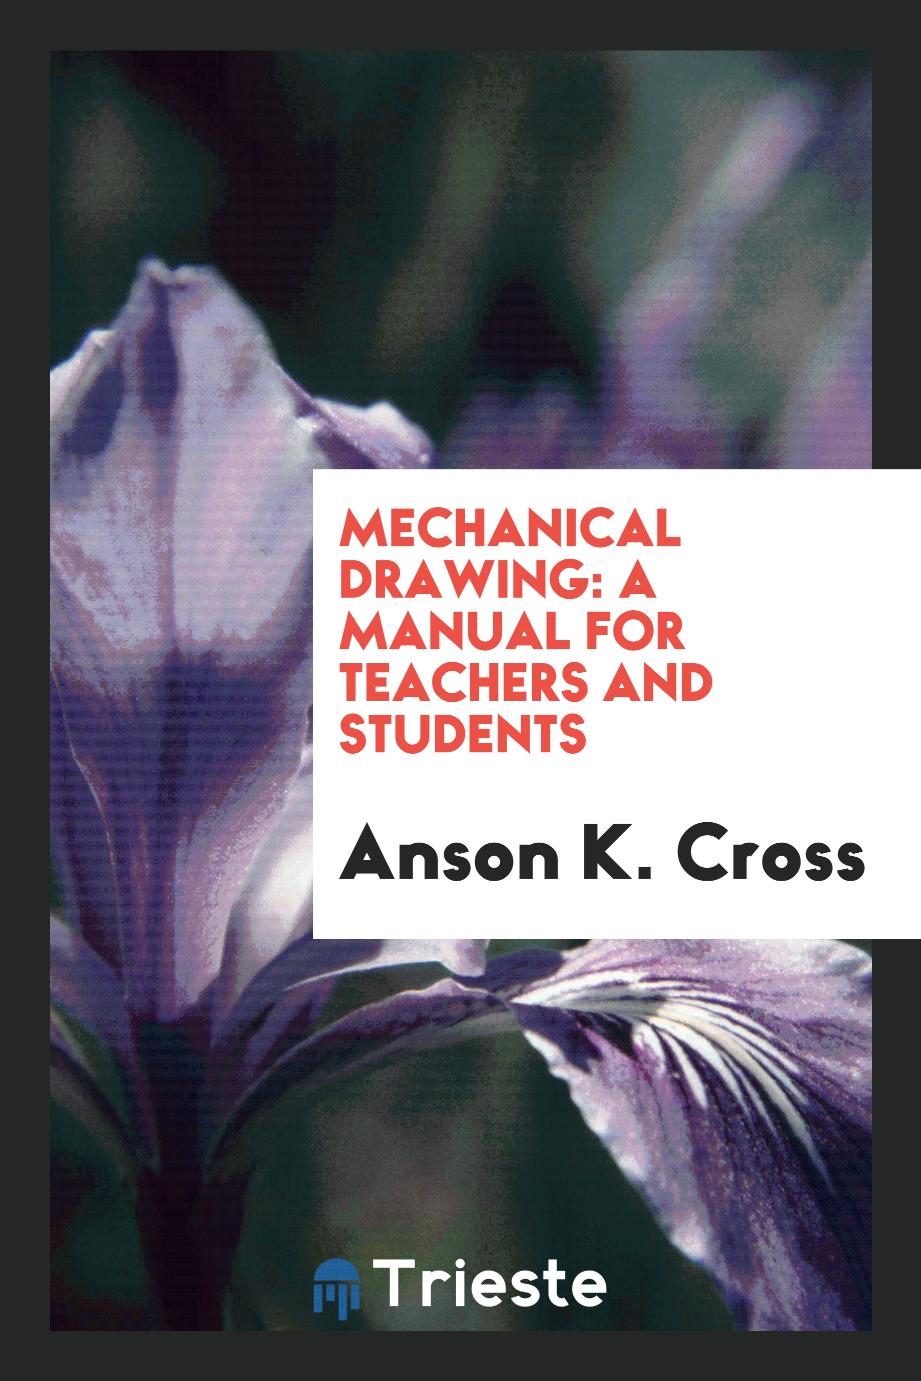 Mechanical drawing: a manual for teachers and students